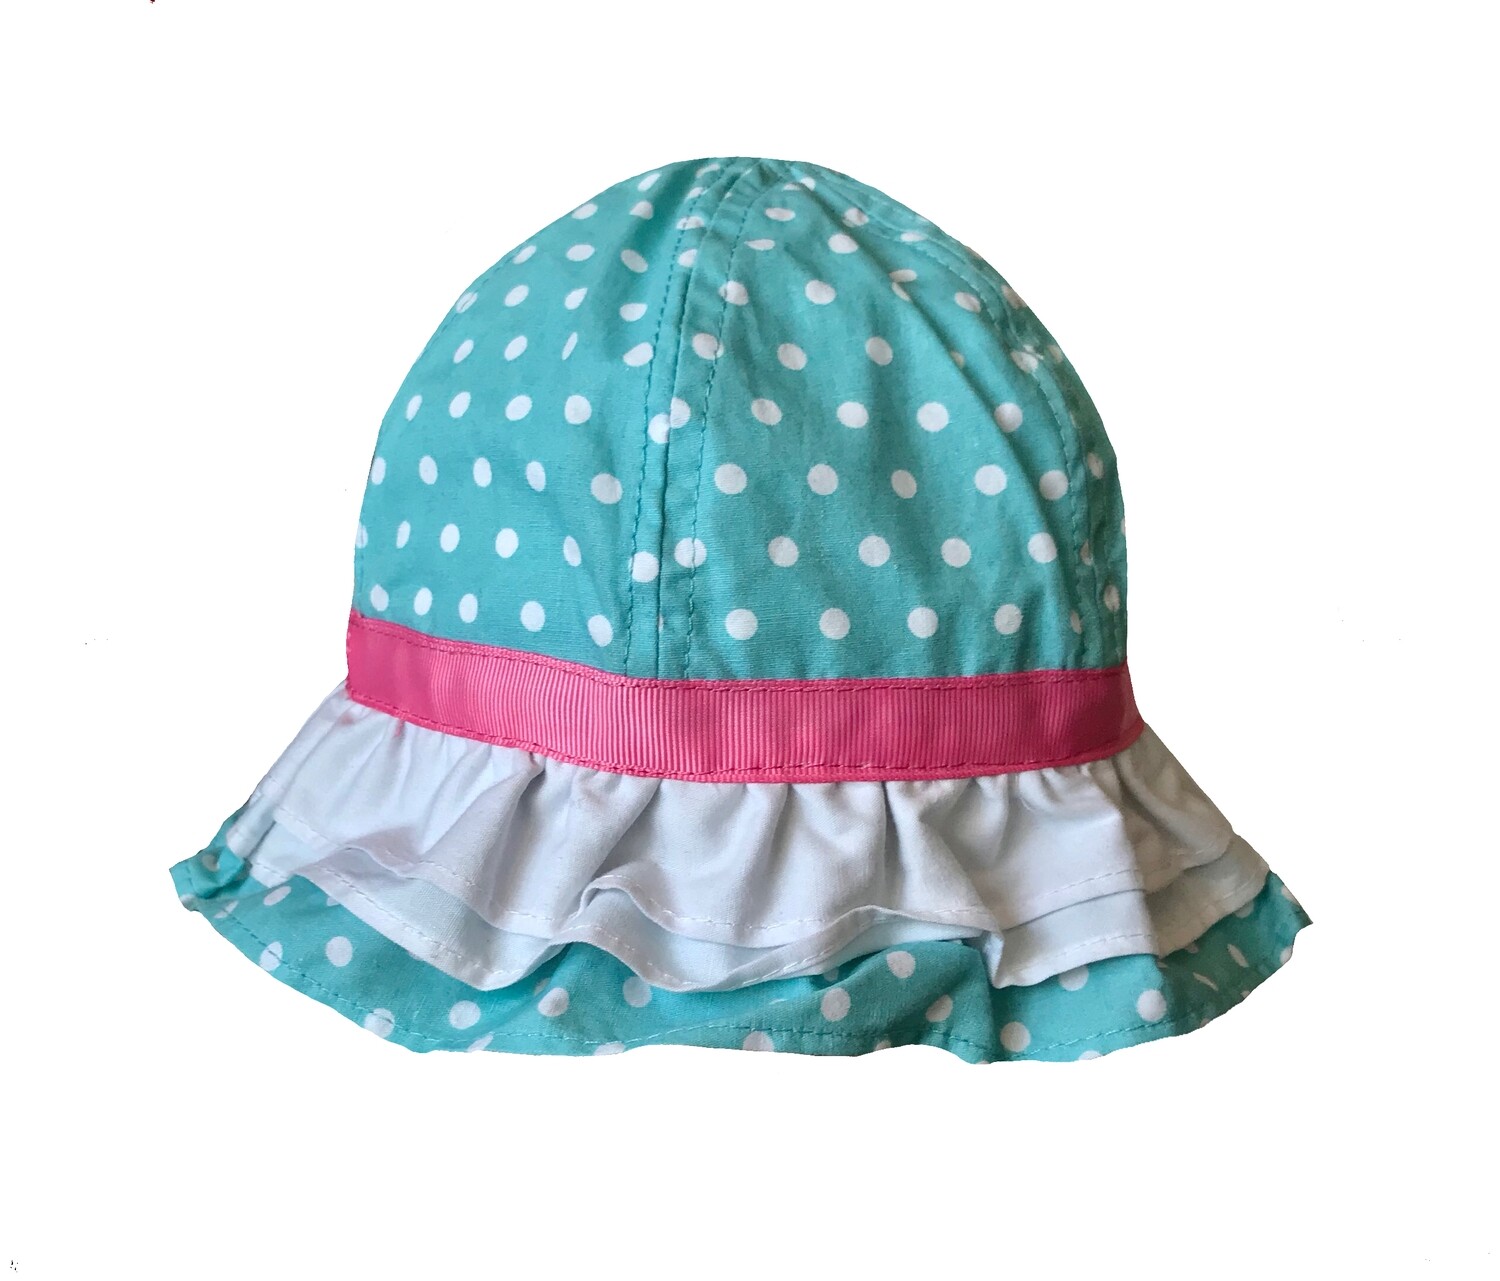 Wee Ones Blue with White Polka Dots (Tie Strap) Sun Hat